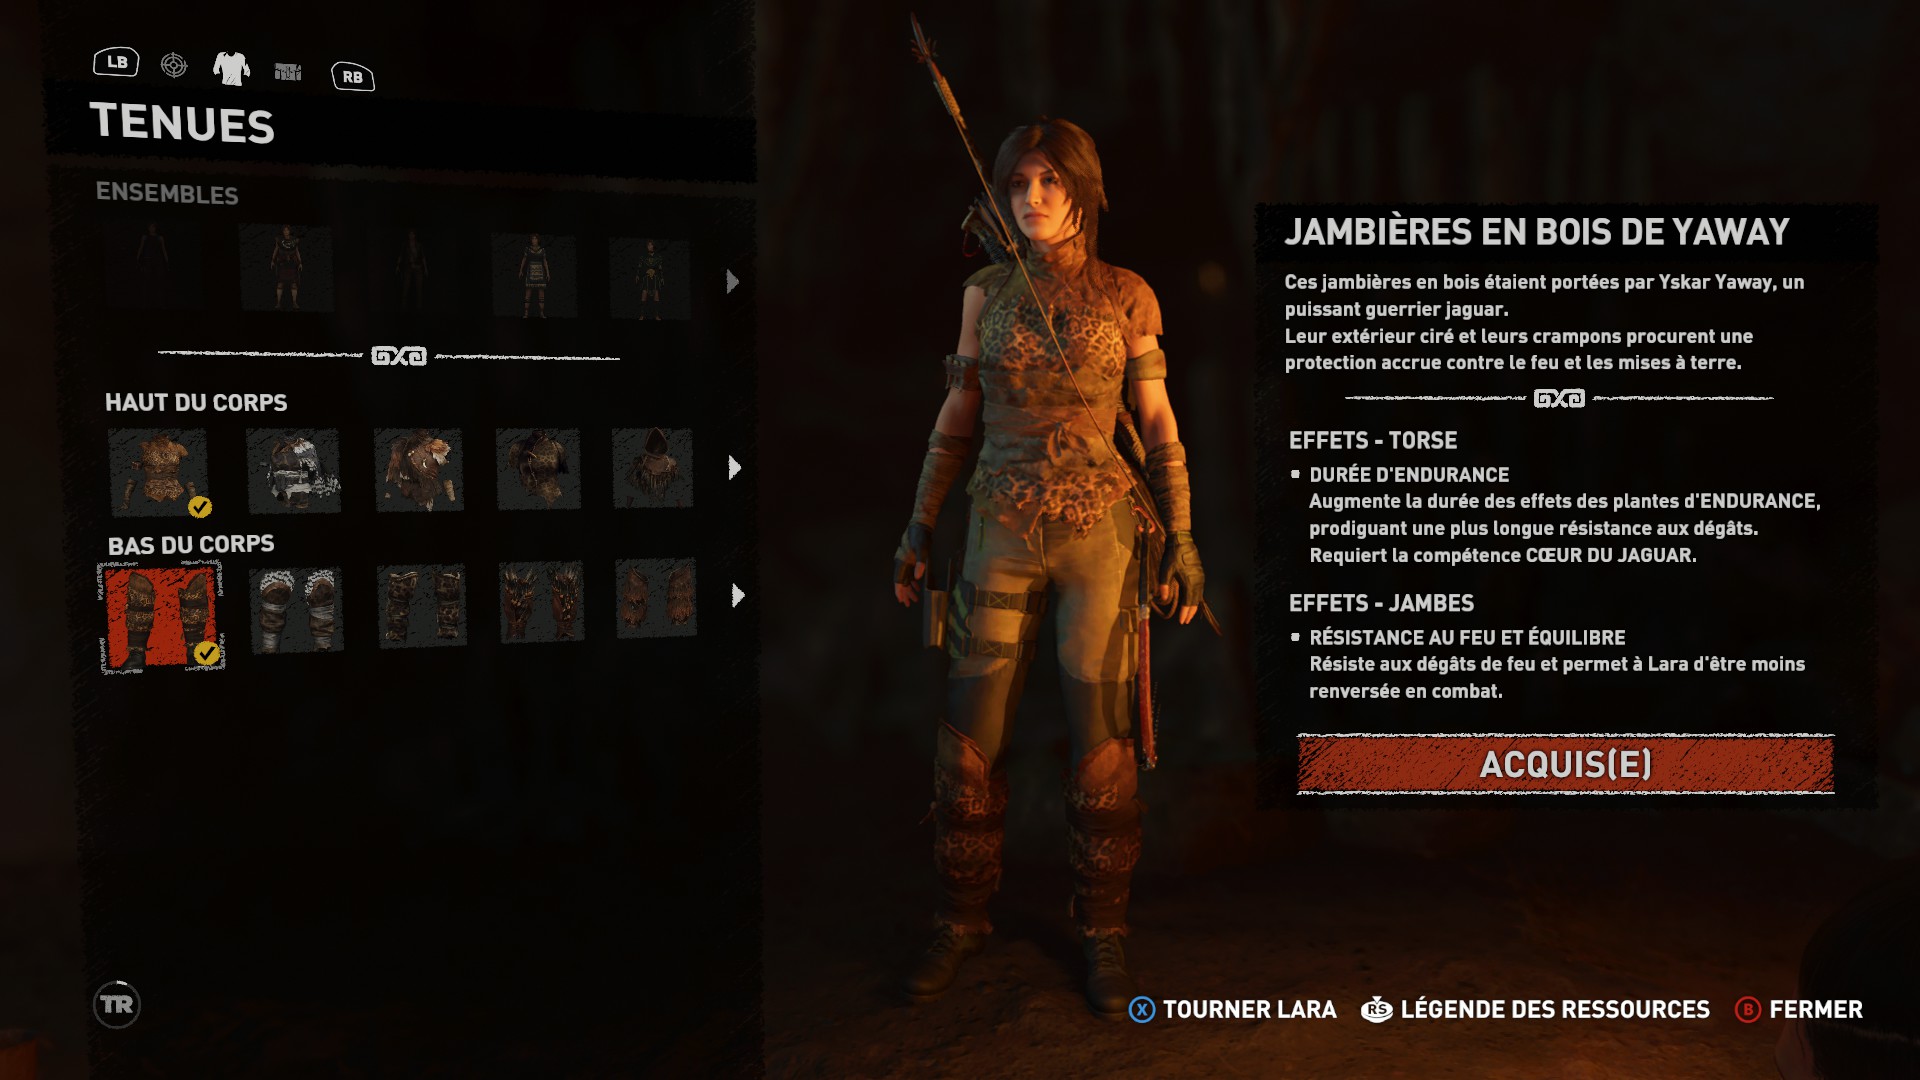 shadow of the tomb raider outfit tenue emplacement soluce solution guide crypte marchand xbox one ps4 pc